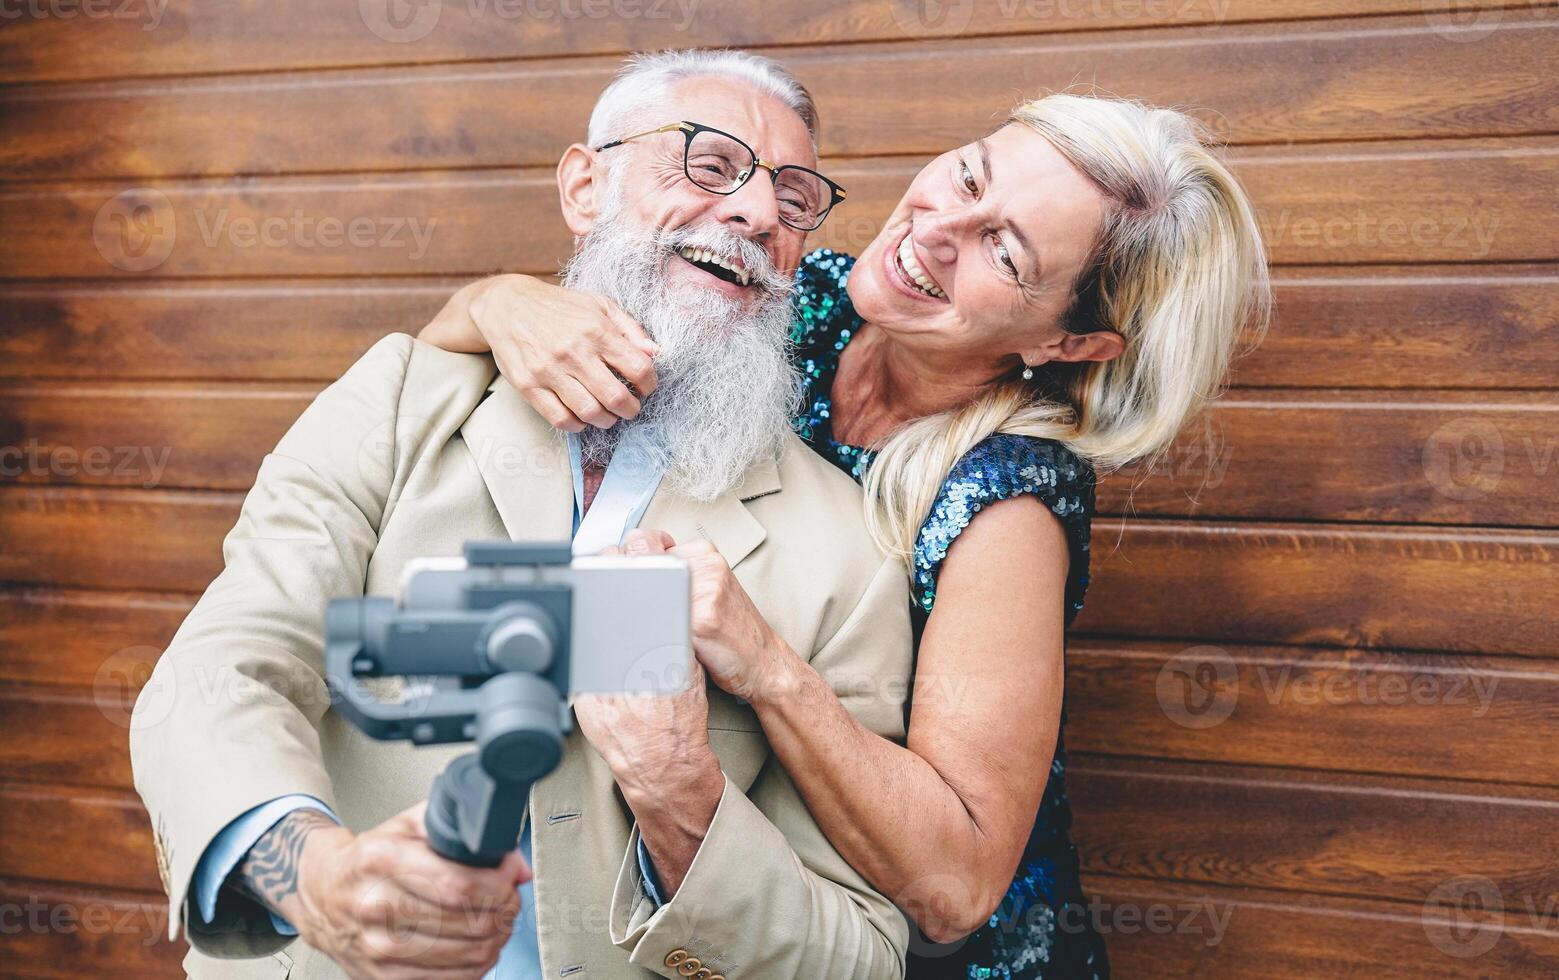 Happy seniors couple recording video with gimbal mobile phone outdoor - Mature fashion people having fun with new trends smartphone apps - wooden background - Elderly lifestyle and technology concept photo